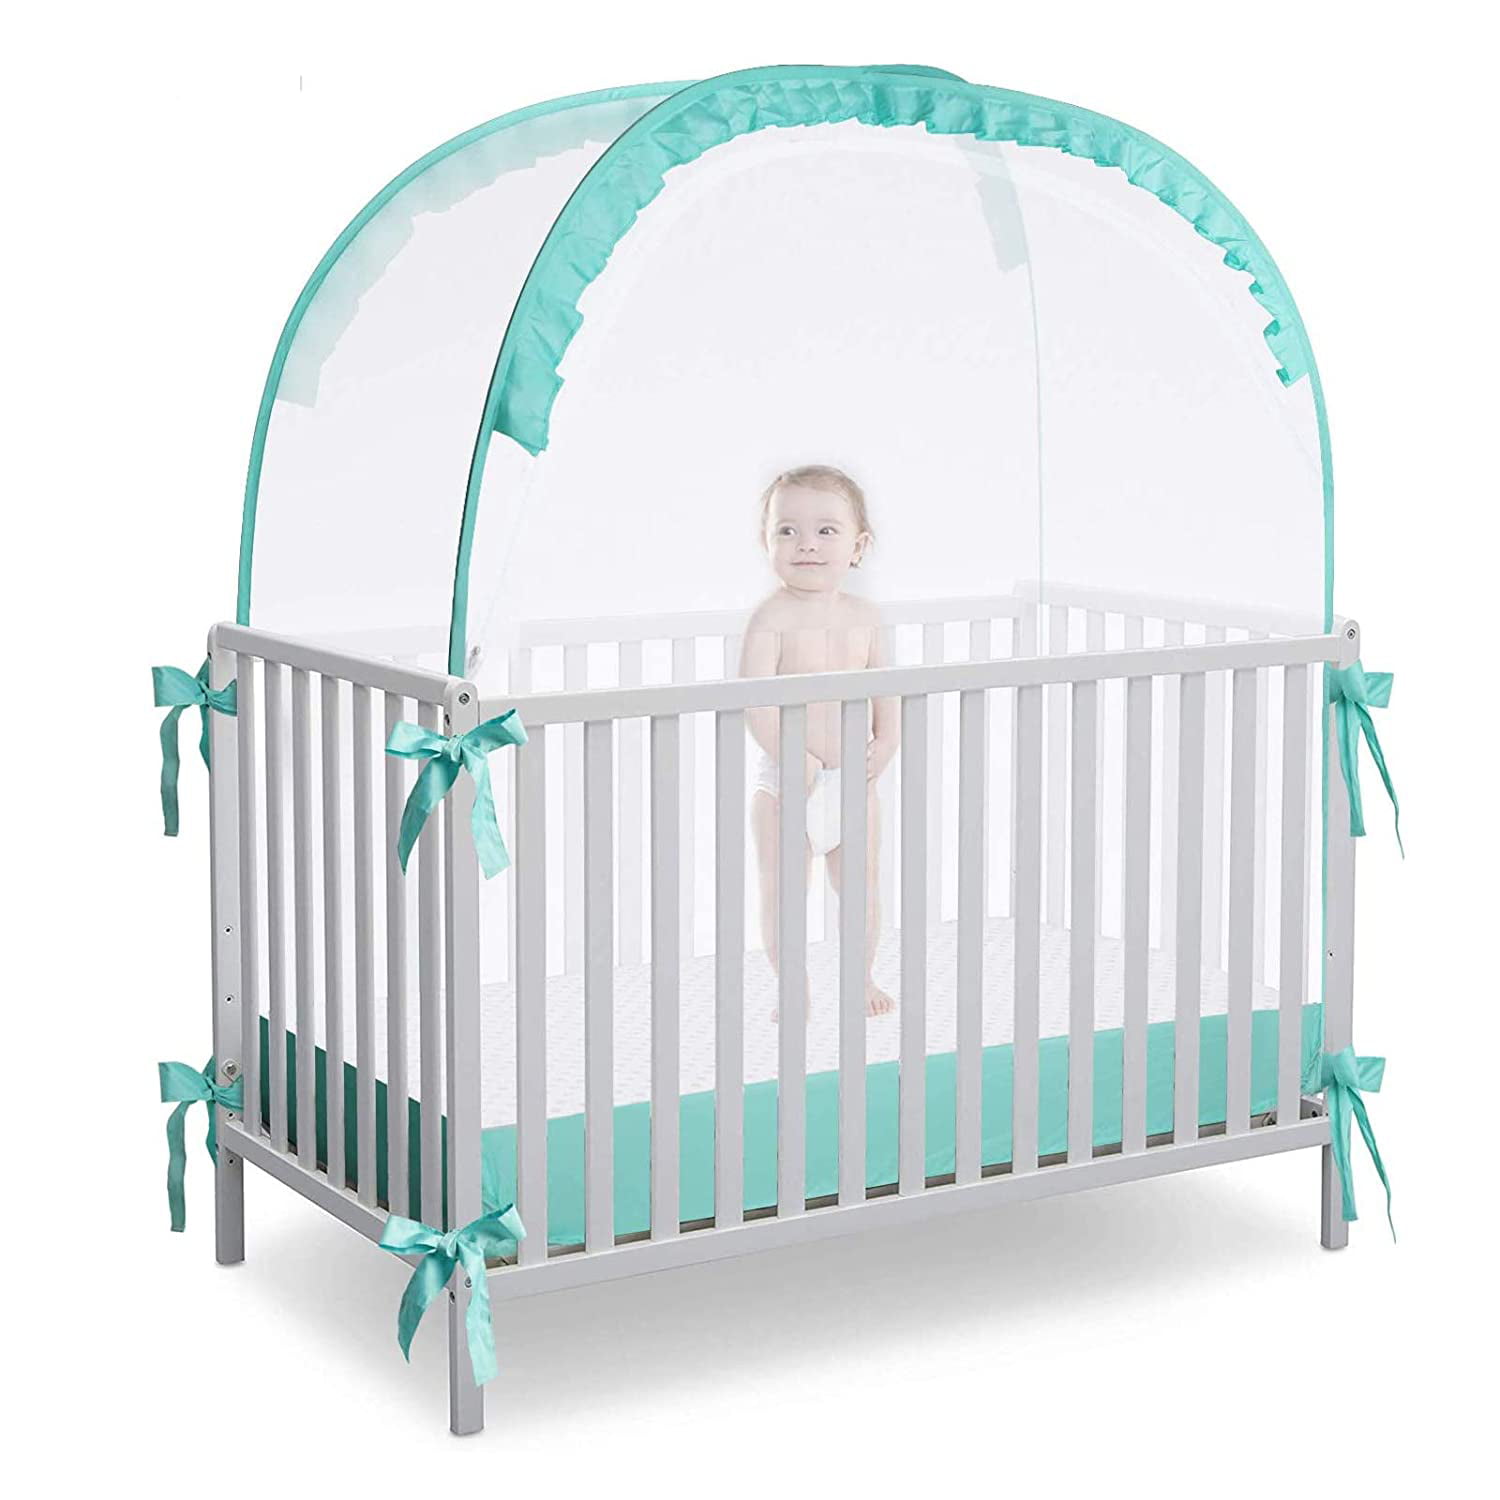 Infant Sun Shelters Pop Up Folding Travel Bed Mosquito Net Sunshade 2020 New Travel Baby Bed Large Baby Tent Portable Baby Travel Tent UPF 50 red 